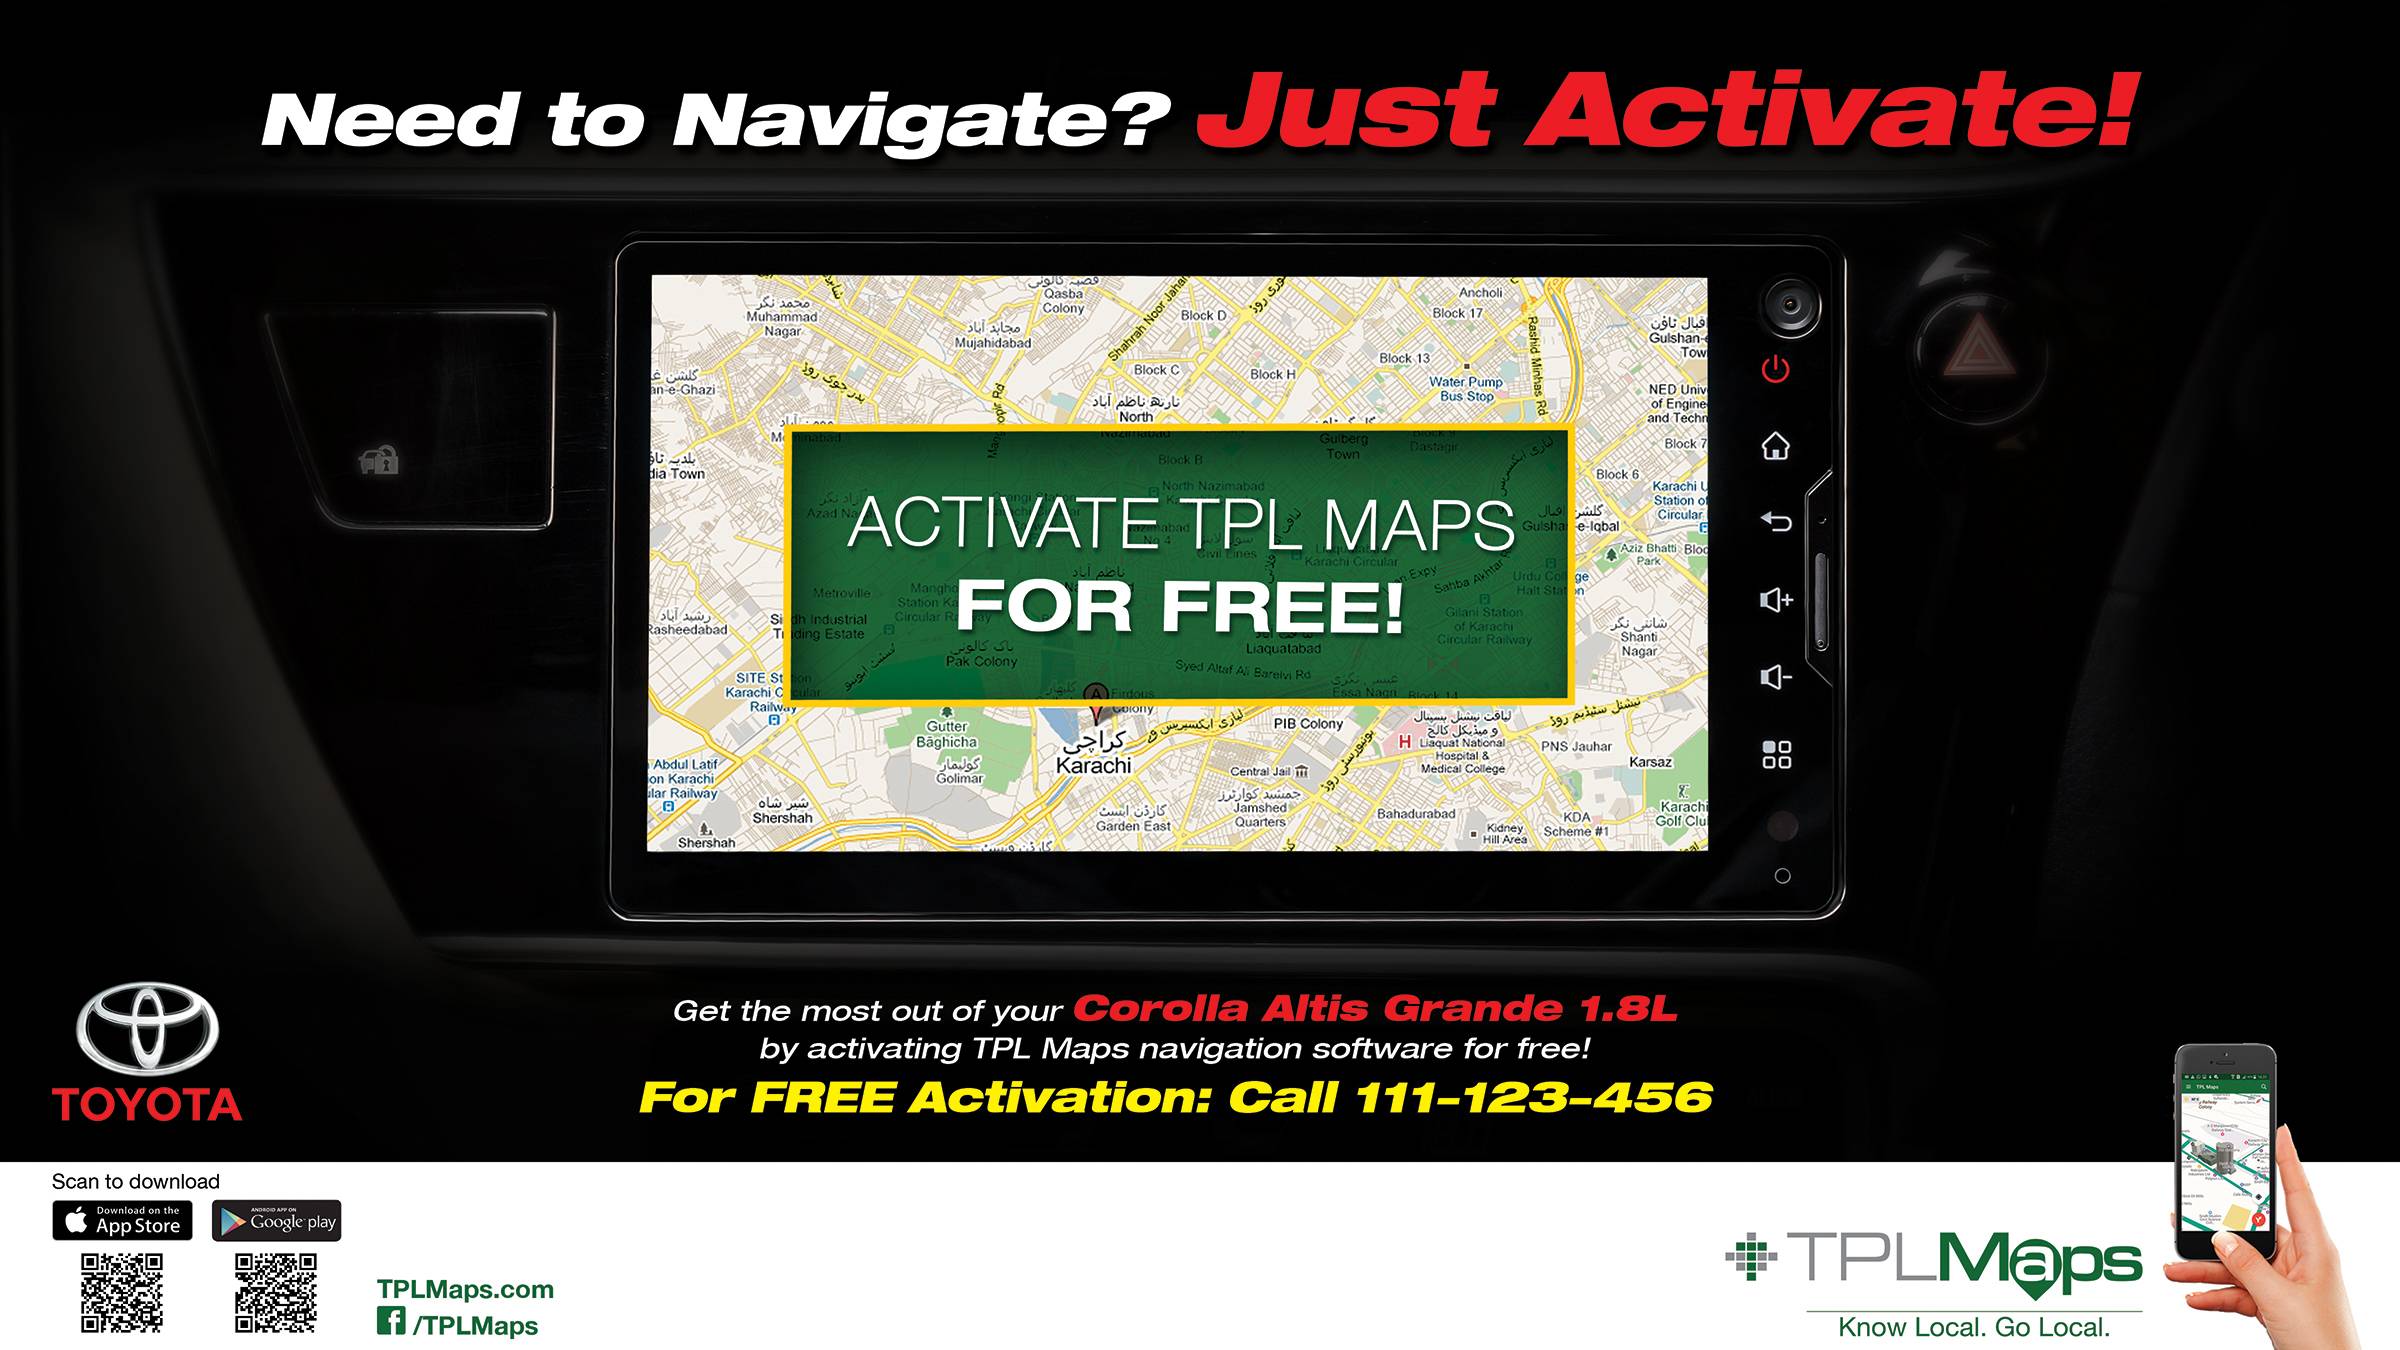 Start your journey in style for free with TPL Maps